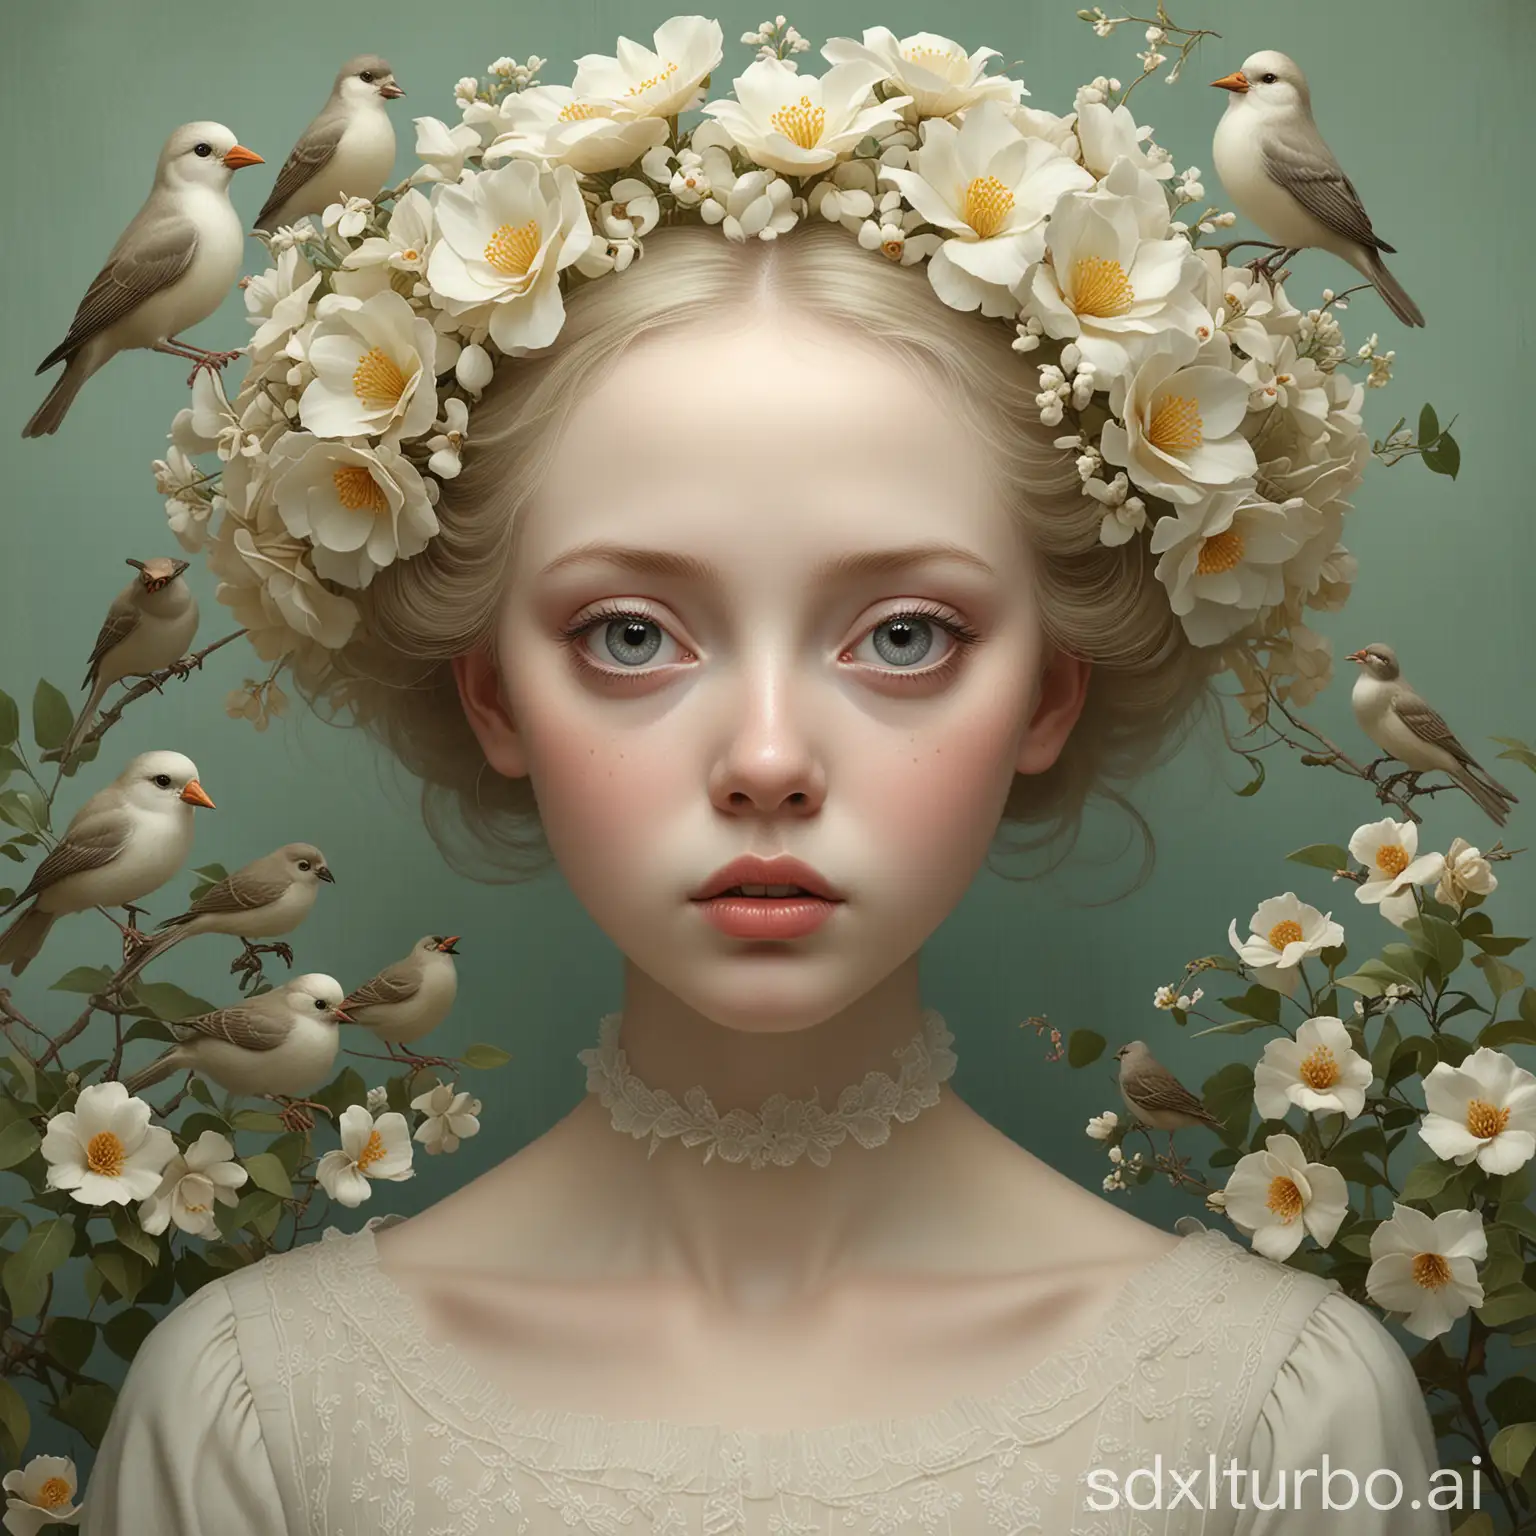 Ghostly-Pale-Girl-in-a-Surreal-Garden-Pop-Surrealism-Portrait-Inspired-by-Ray-Caesar